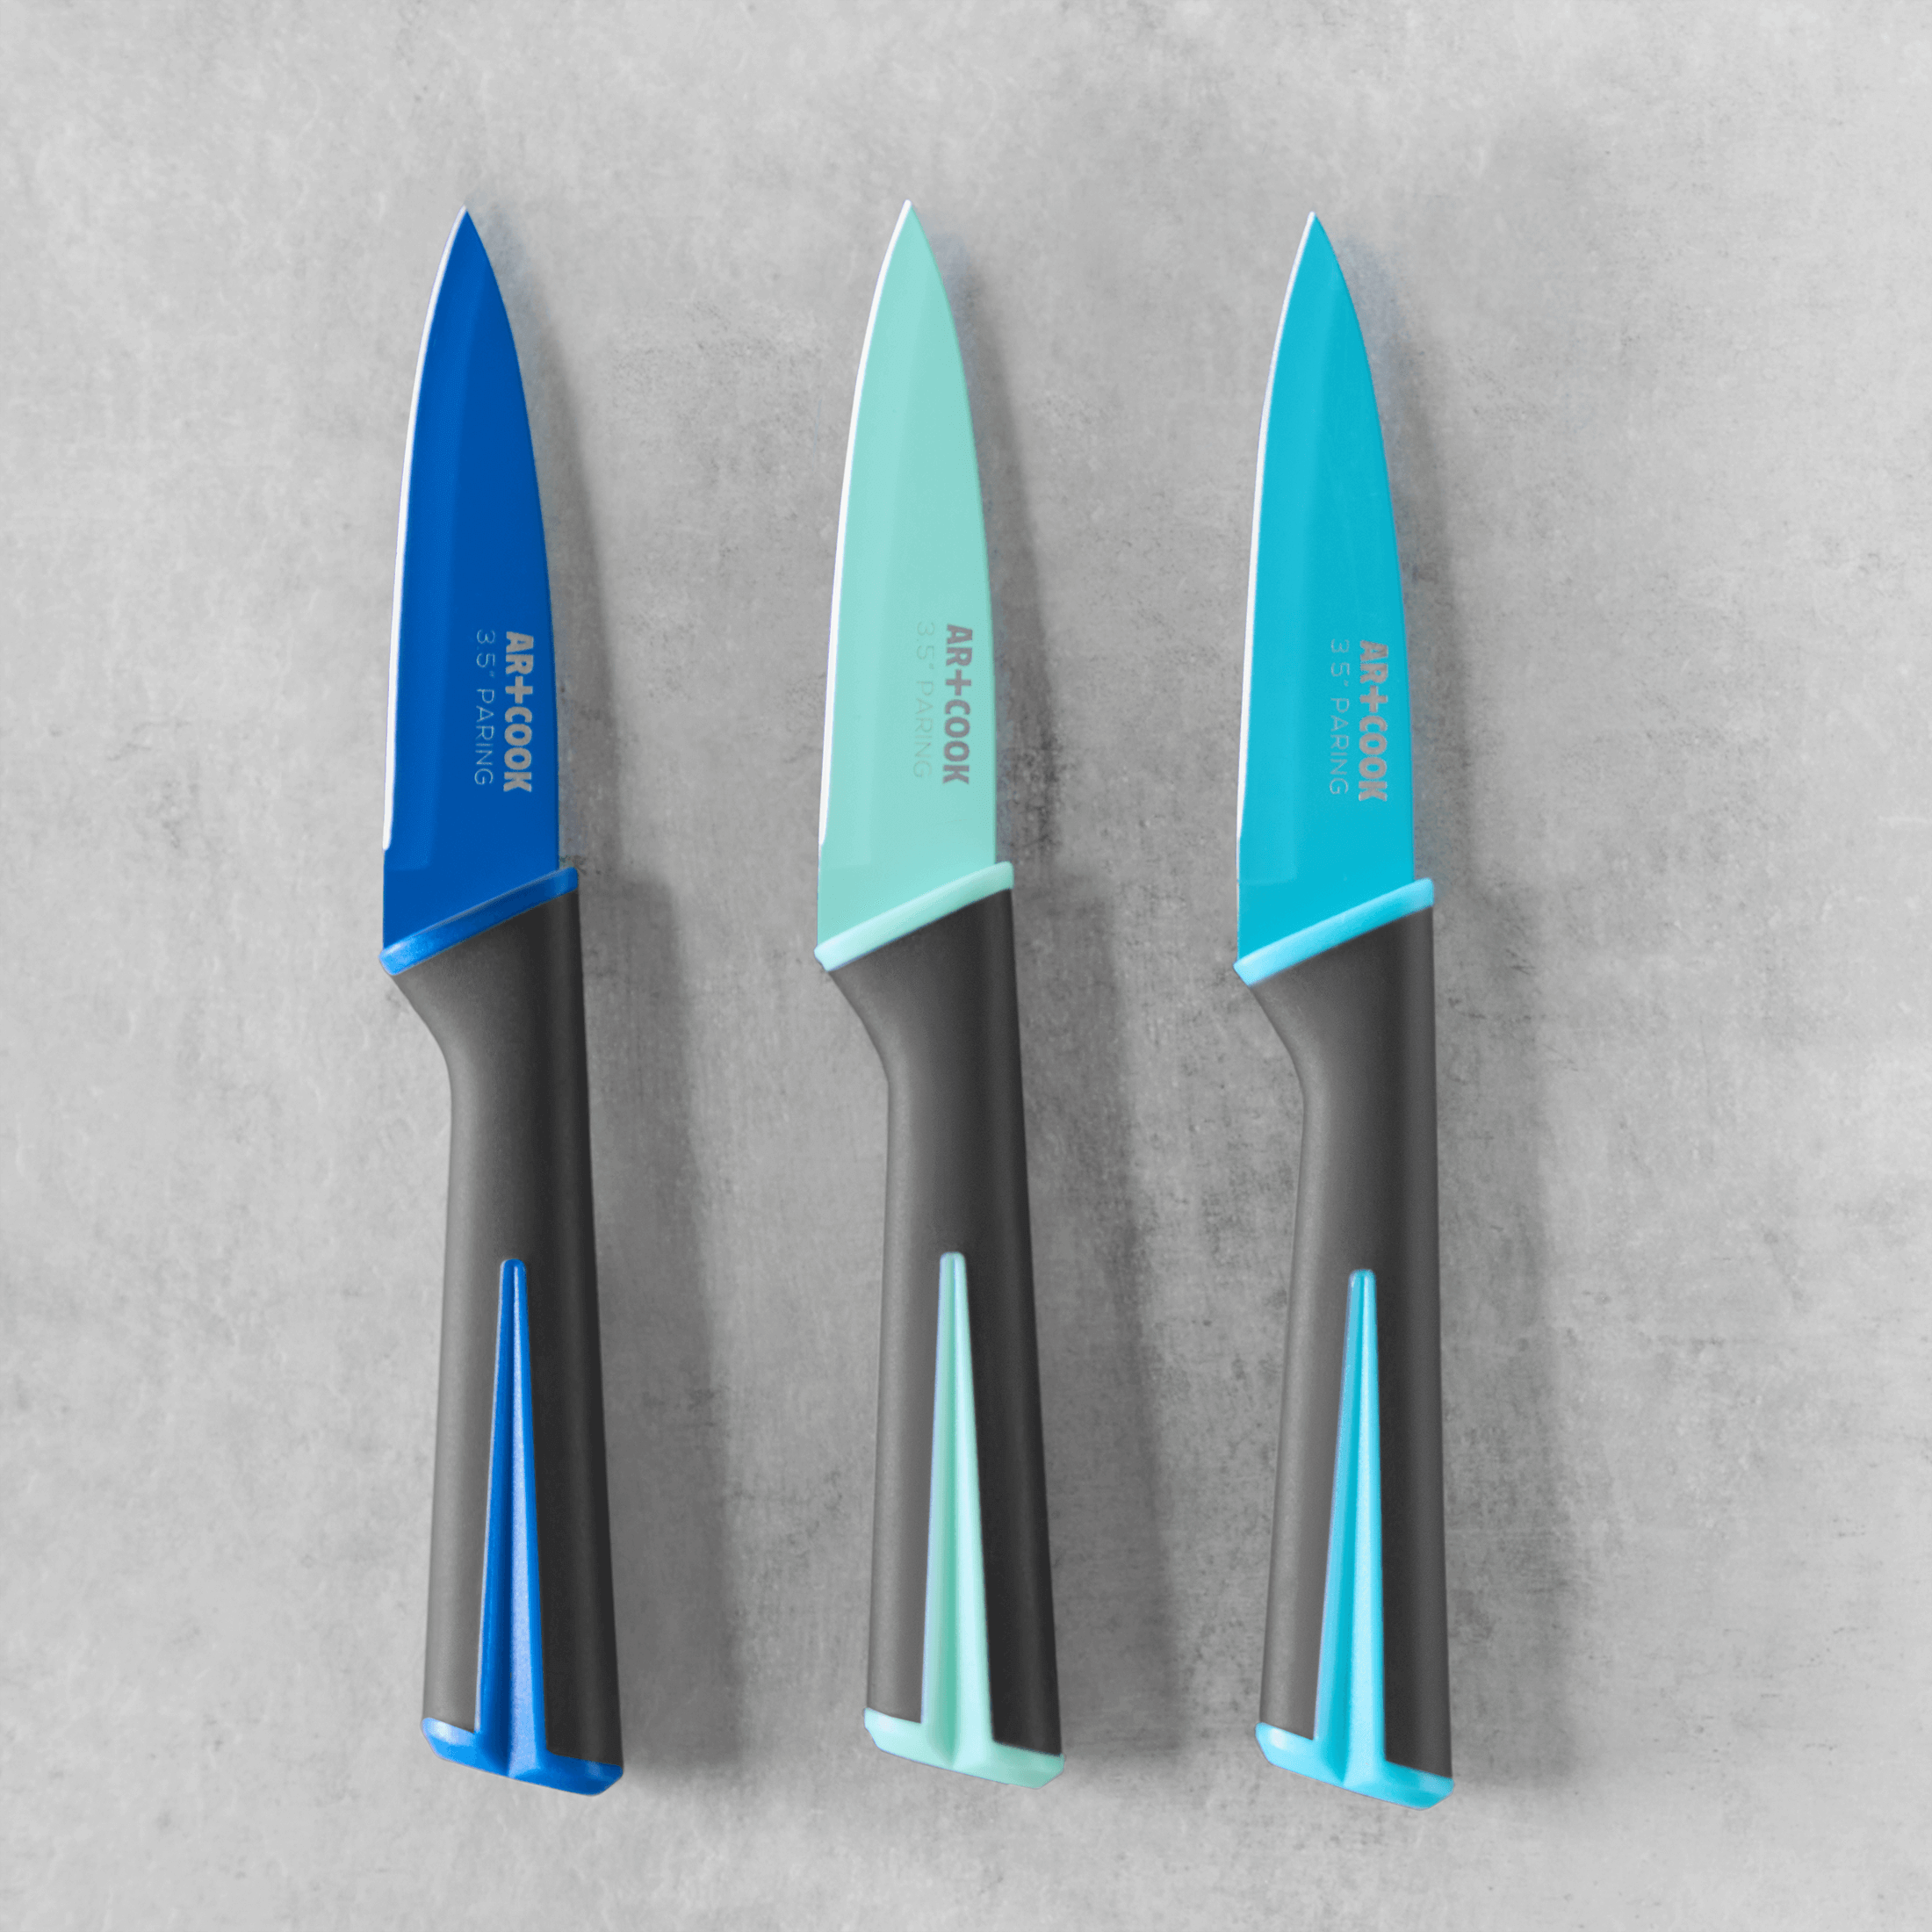 Ceramic Knife Sets for Kitchen 4 Piece with Holder,Ceramic Chef's Paring  Knives with Steath,Vegetable Cutting Knife Lettuce Knife Suitable for